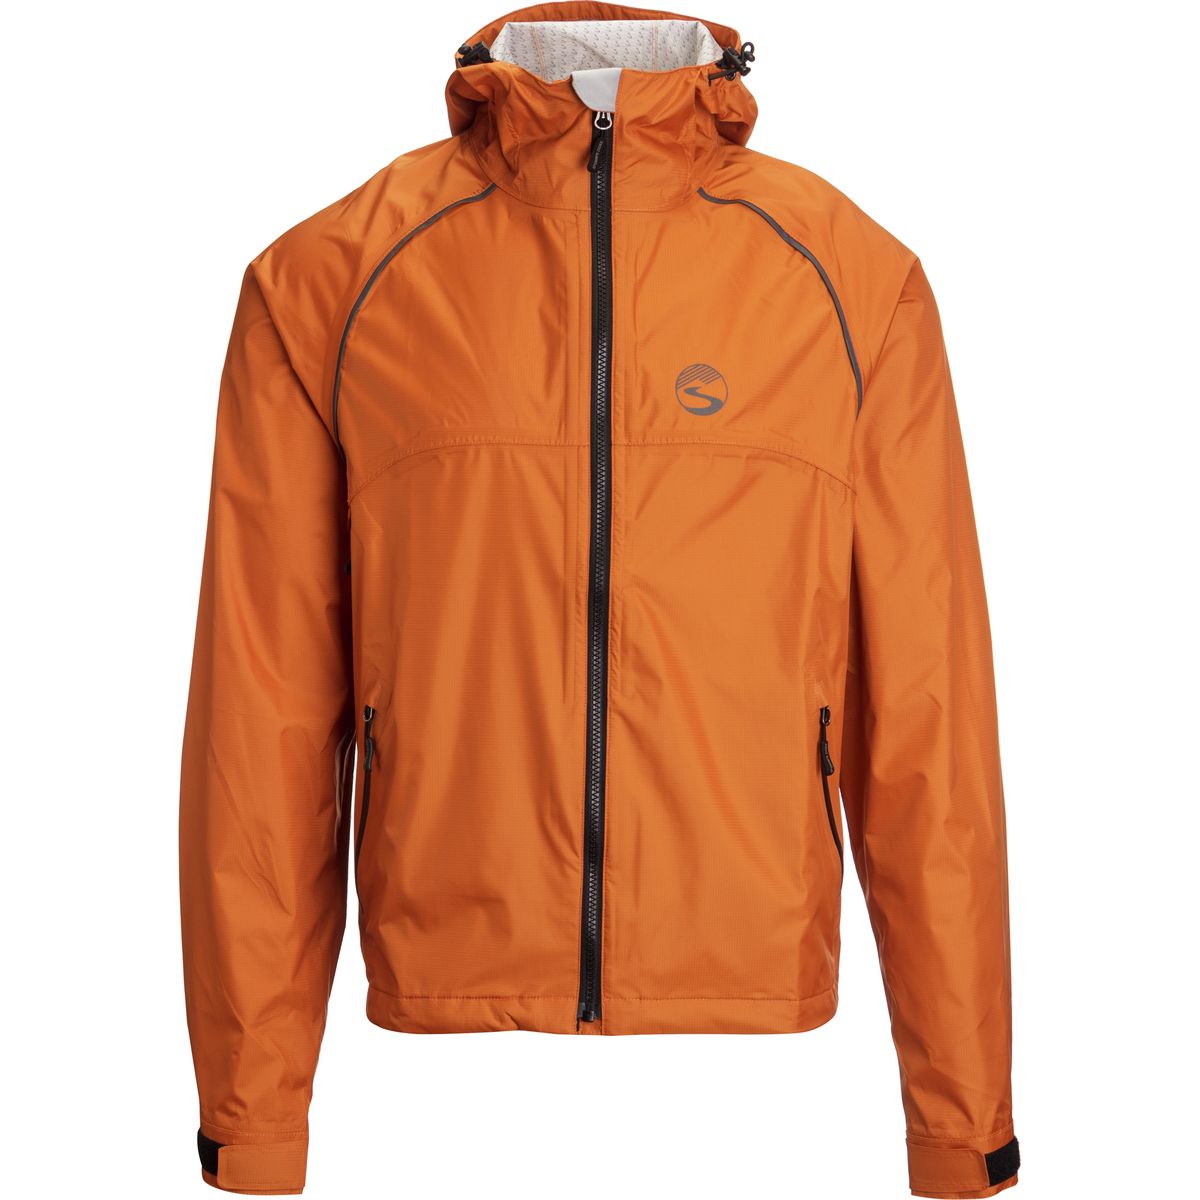 Showers Pass Syncline Jacket - Men's